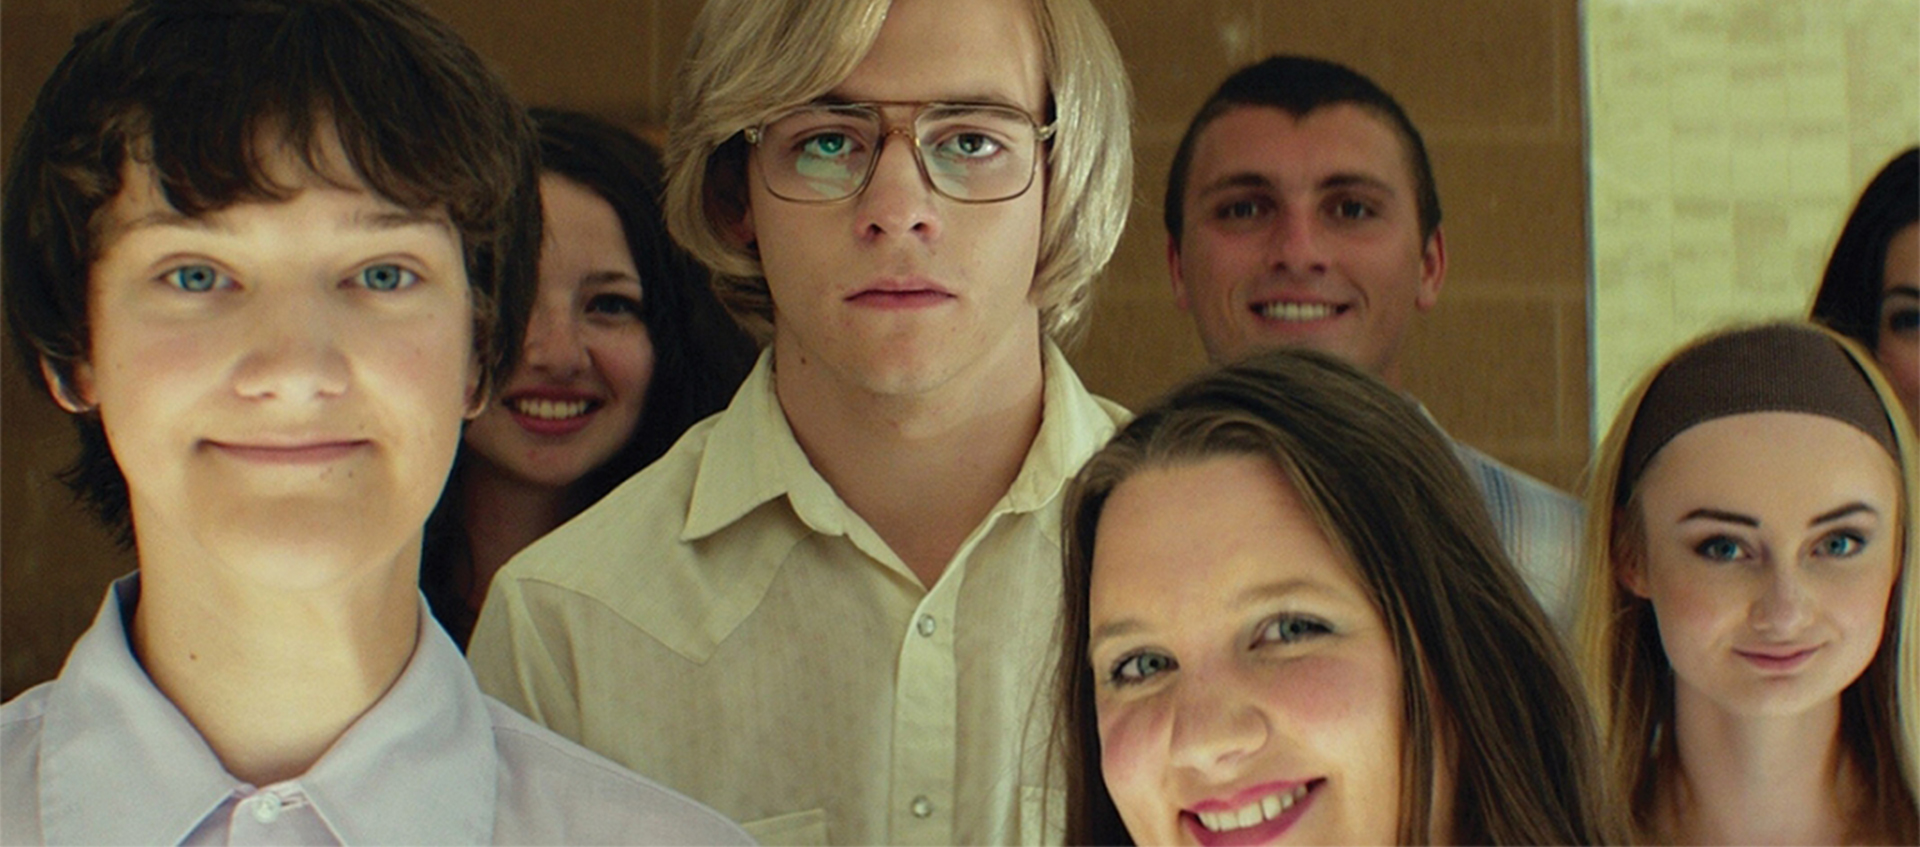 Dahmer and his friends looking into the camera with varying facial expressions